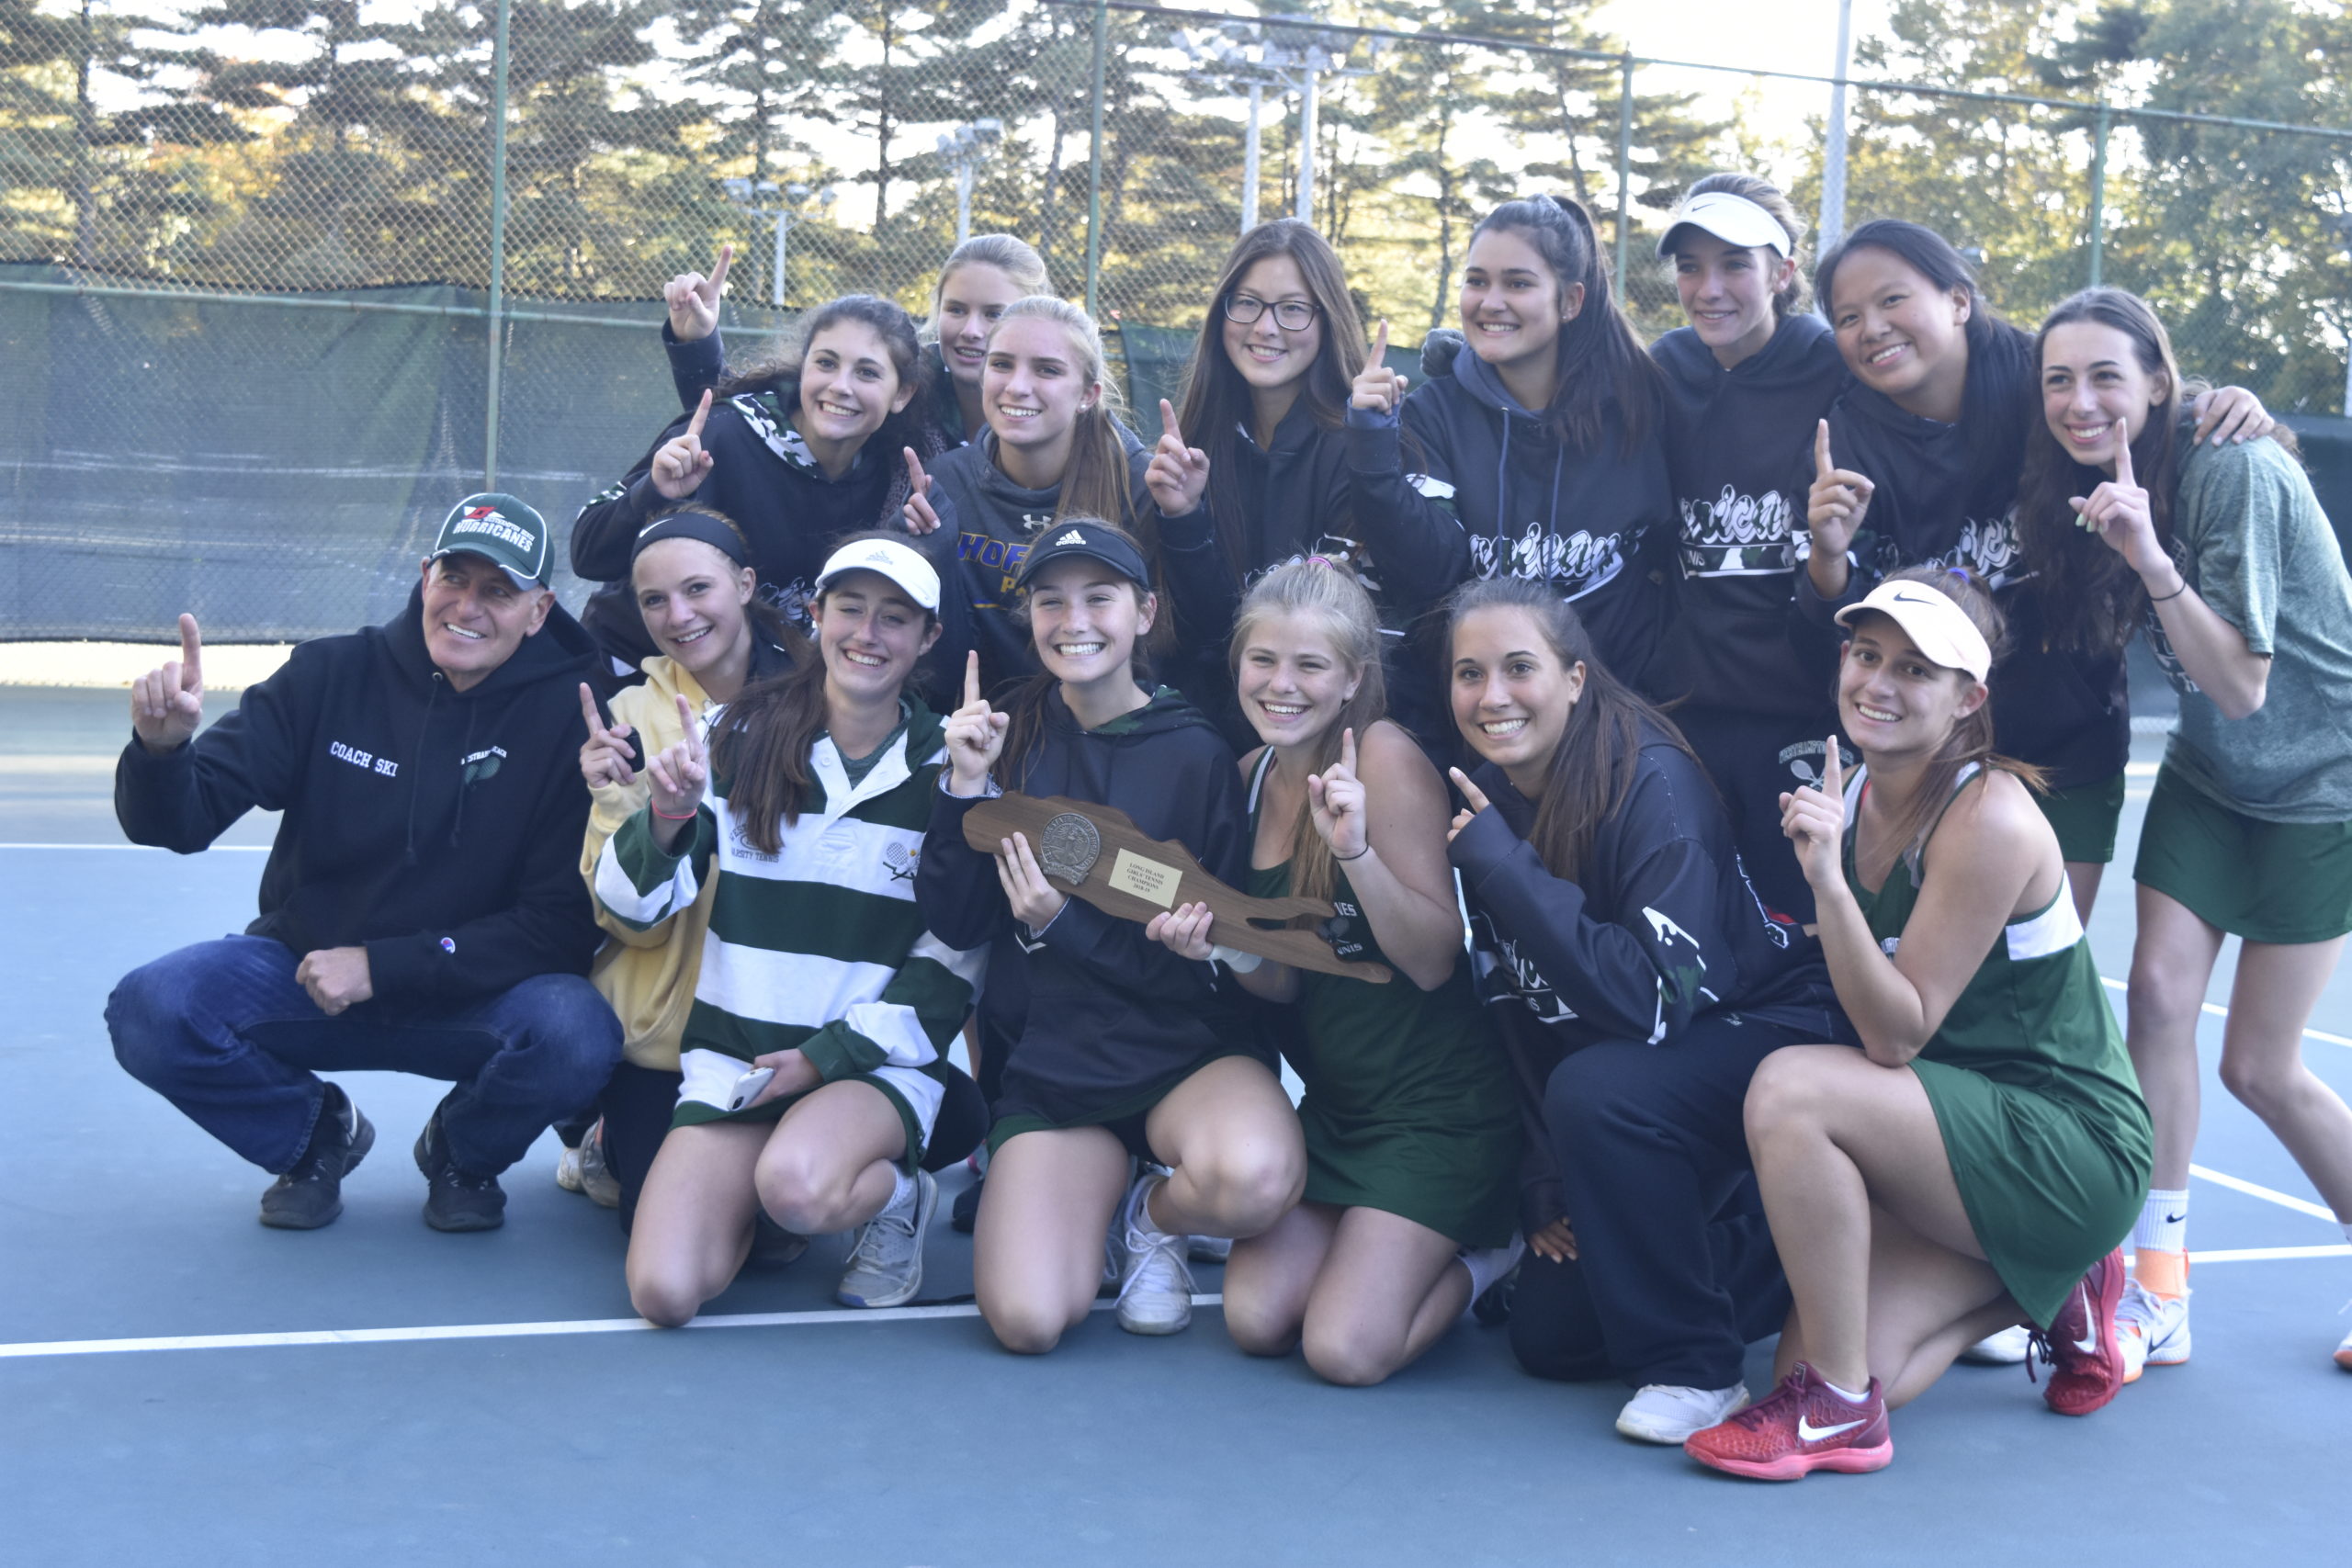 John Czartosieski, far left, led the Westhampton Beach girls tennis team to a Long Island Championship in 2018, the first team in Suffolk County to ever to do so.